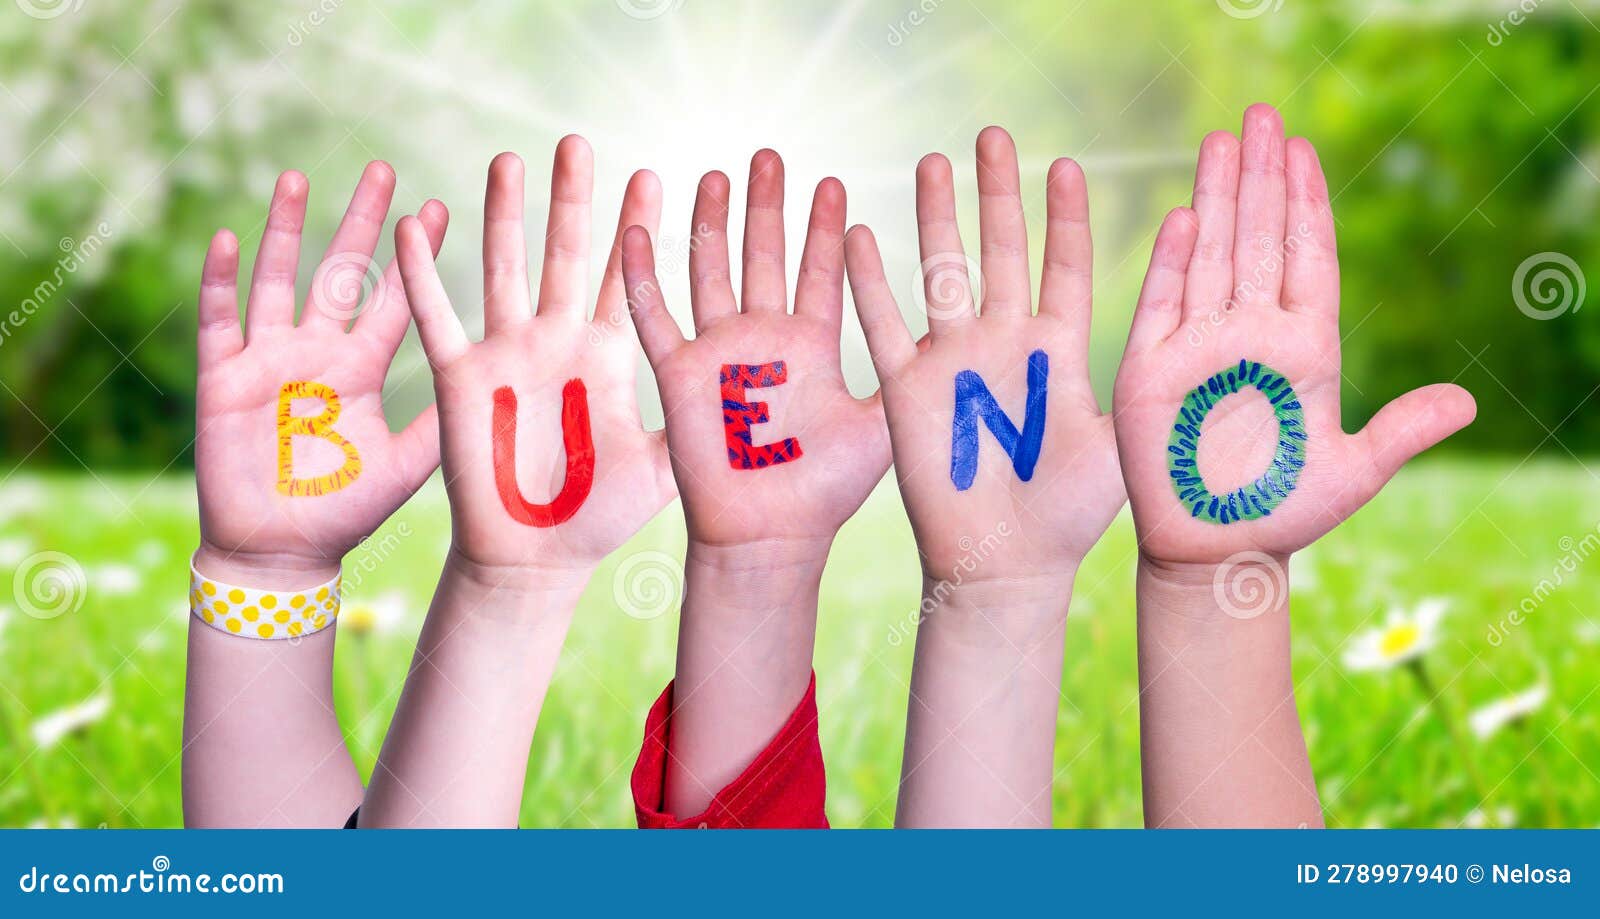 children hands building word bueno means good, grass meadow